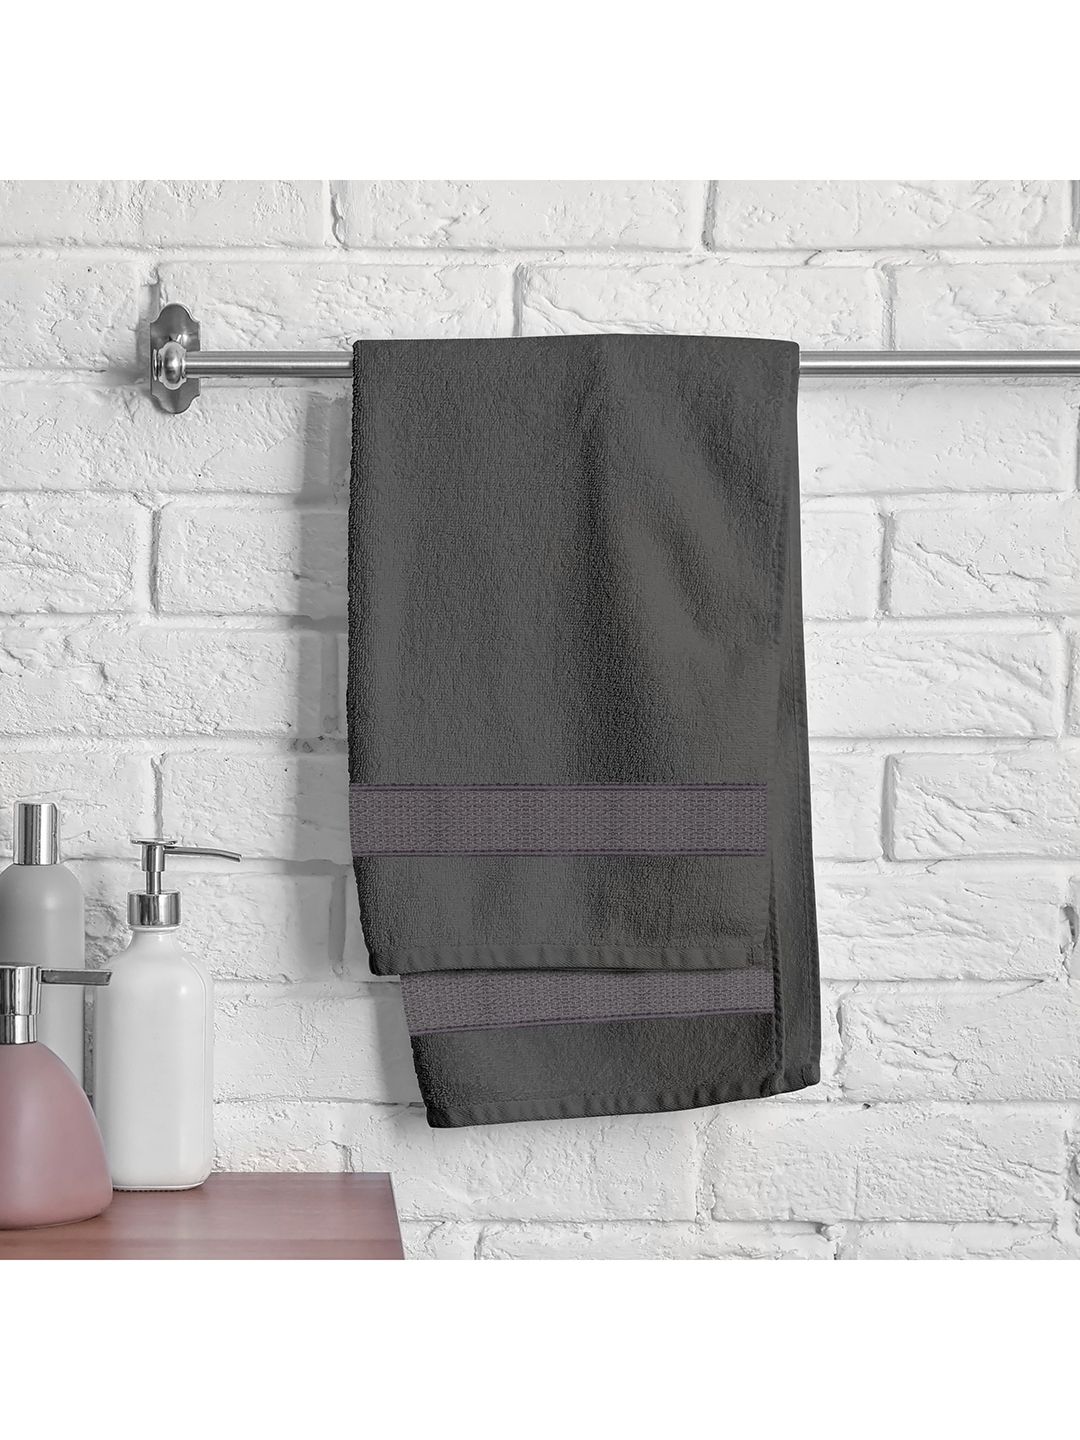 Athome by Nilkamal Unisex Set of 4 Charcoal Grey & Maroon Solid 370 GSM Cotton Hand Towels Price in India